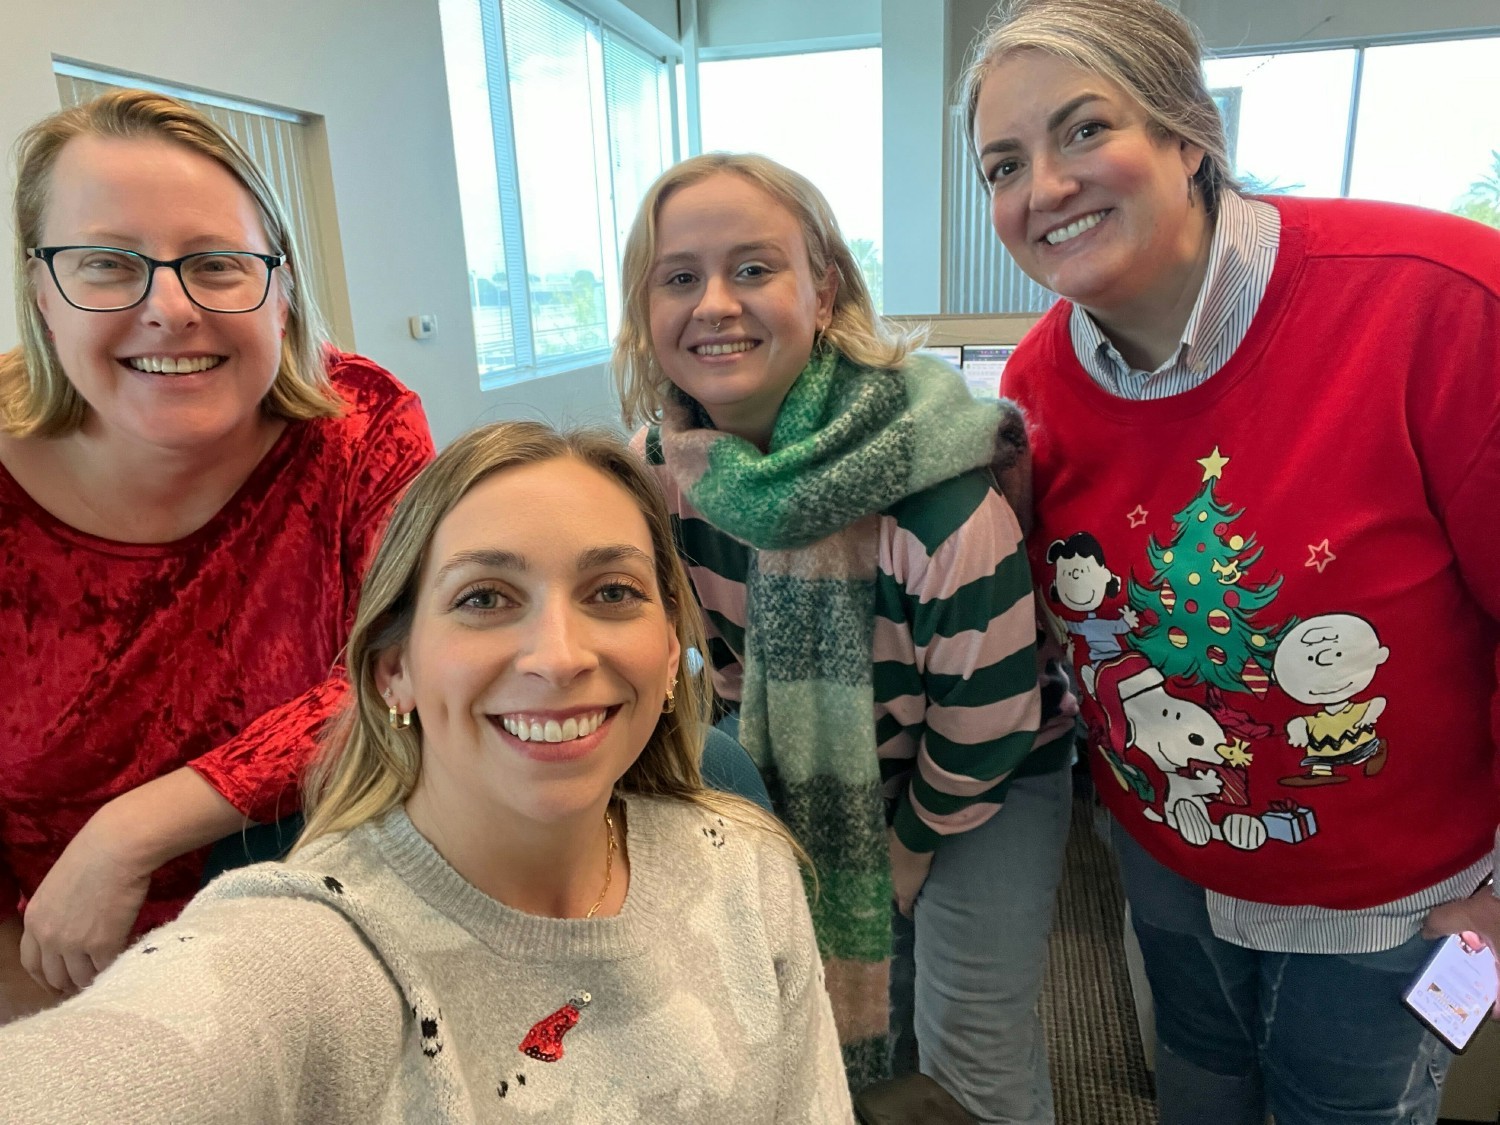 Employee Ugly Sweater Day